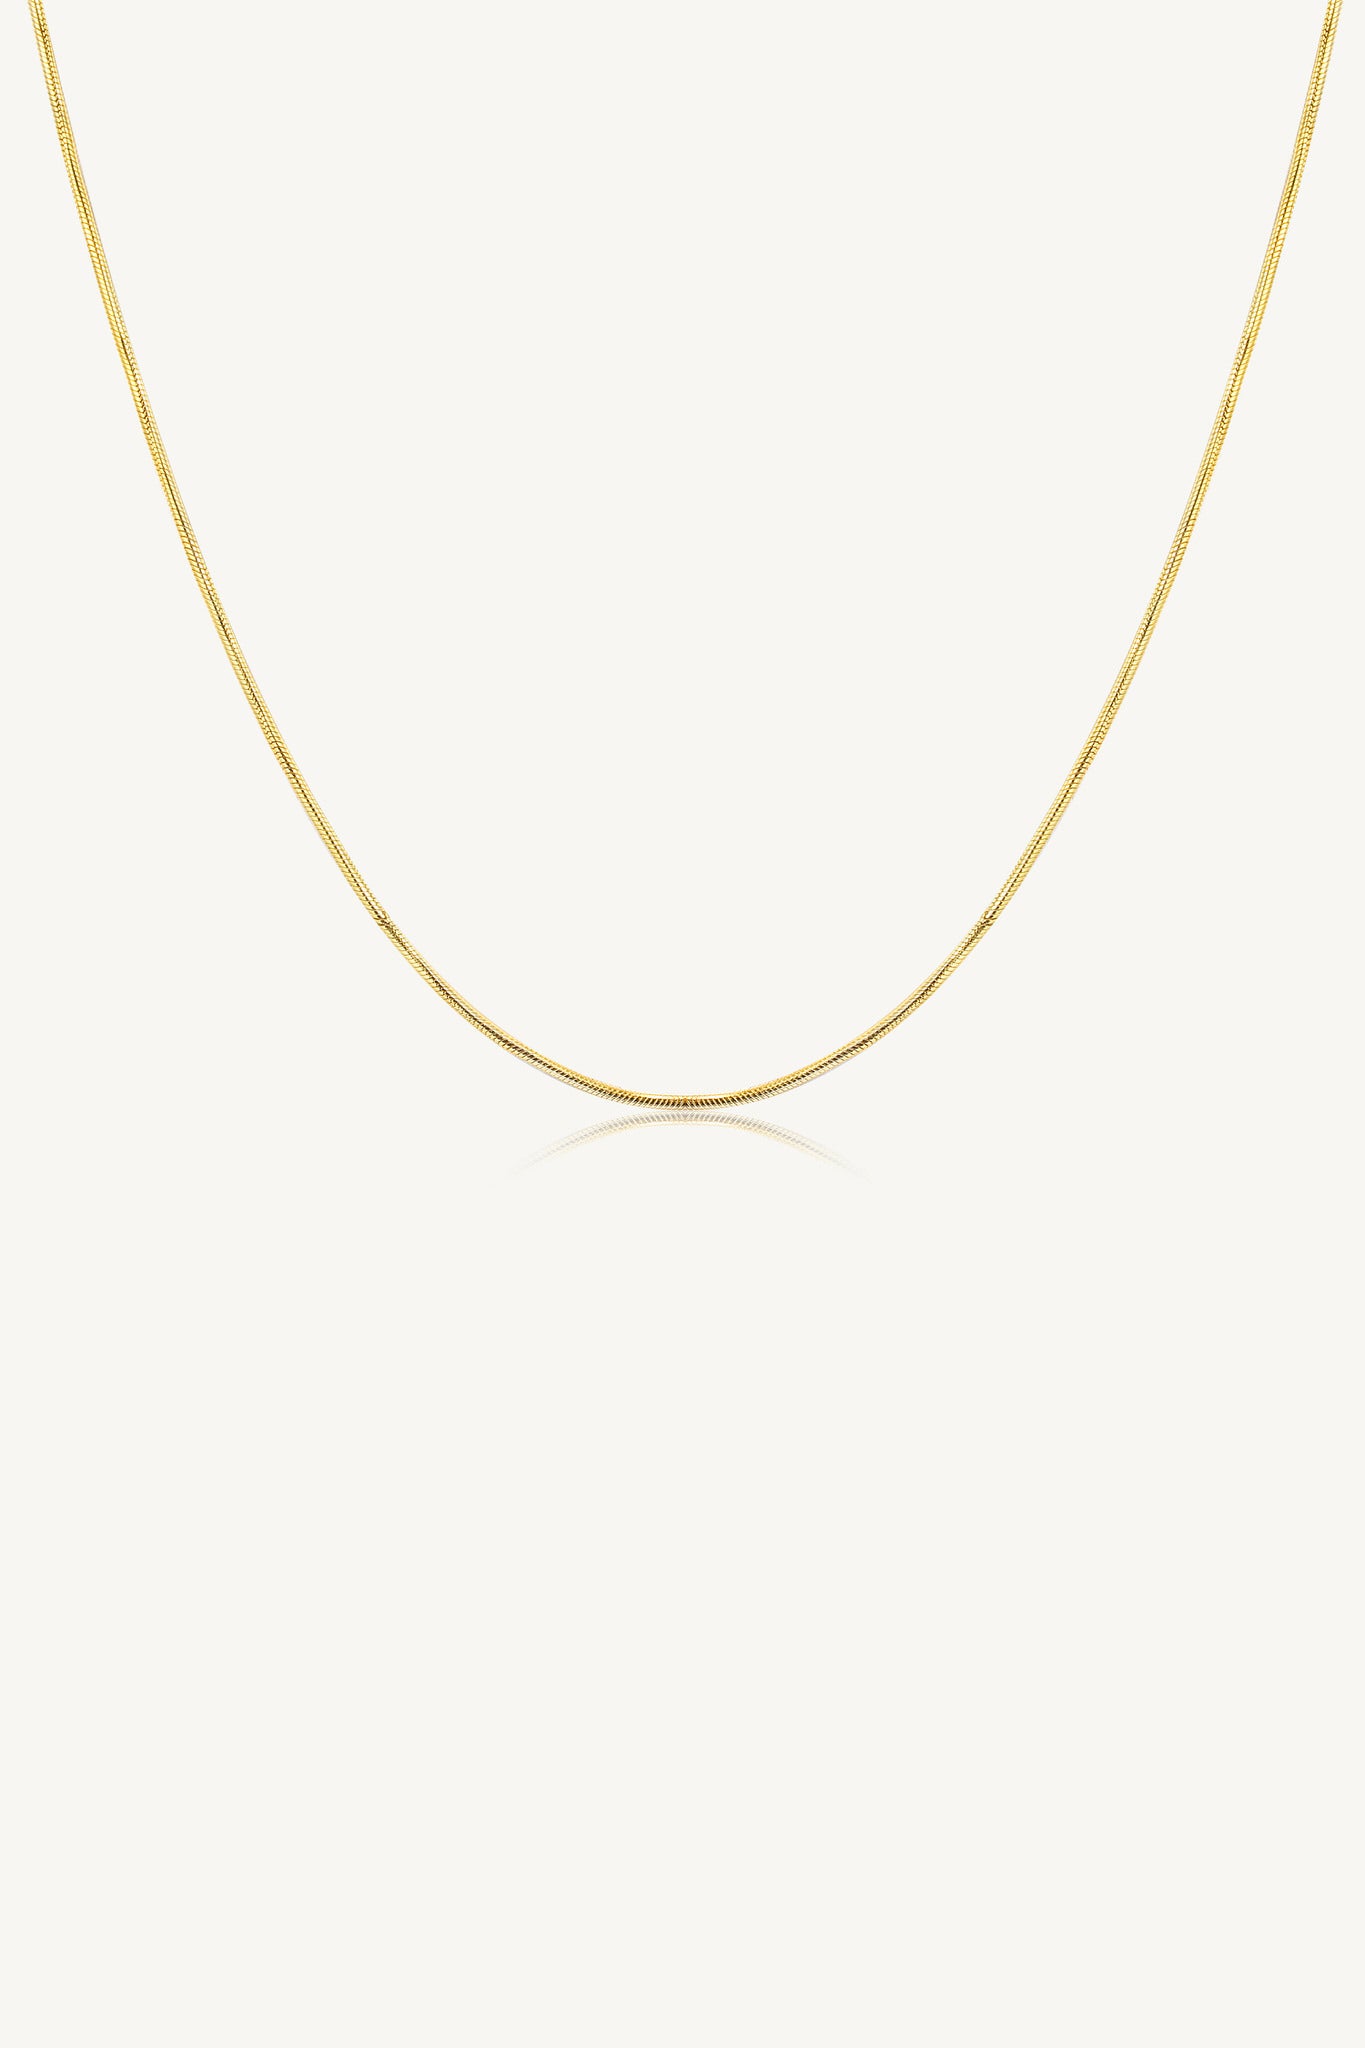  Skinny Snake Chain Necklace Gold Vermeil 